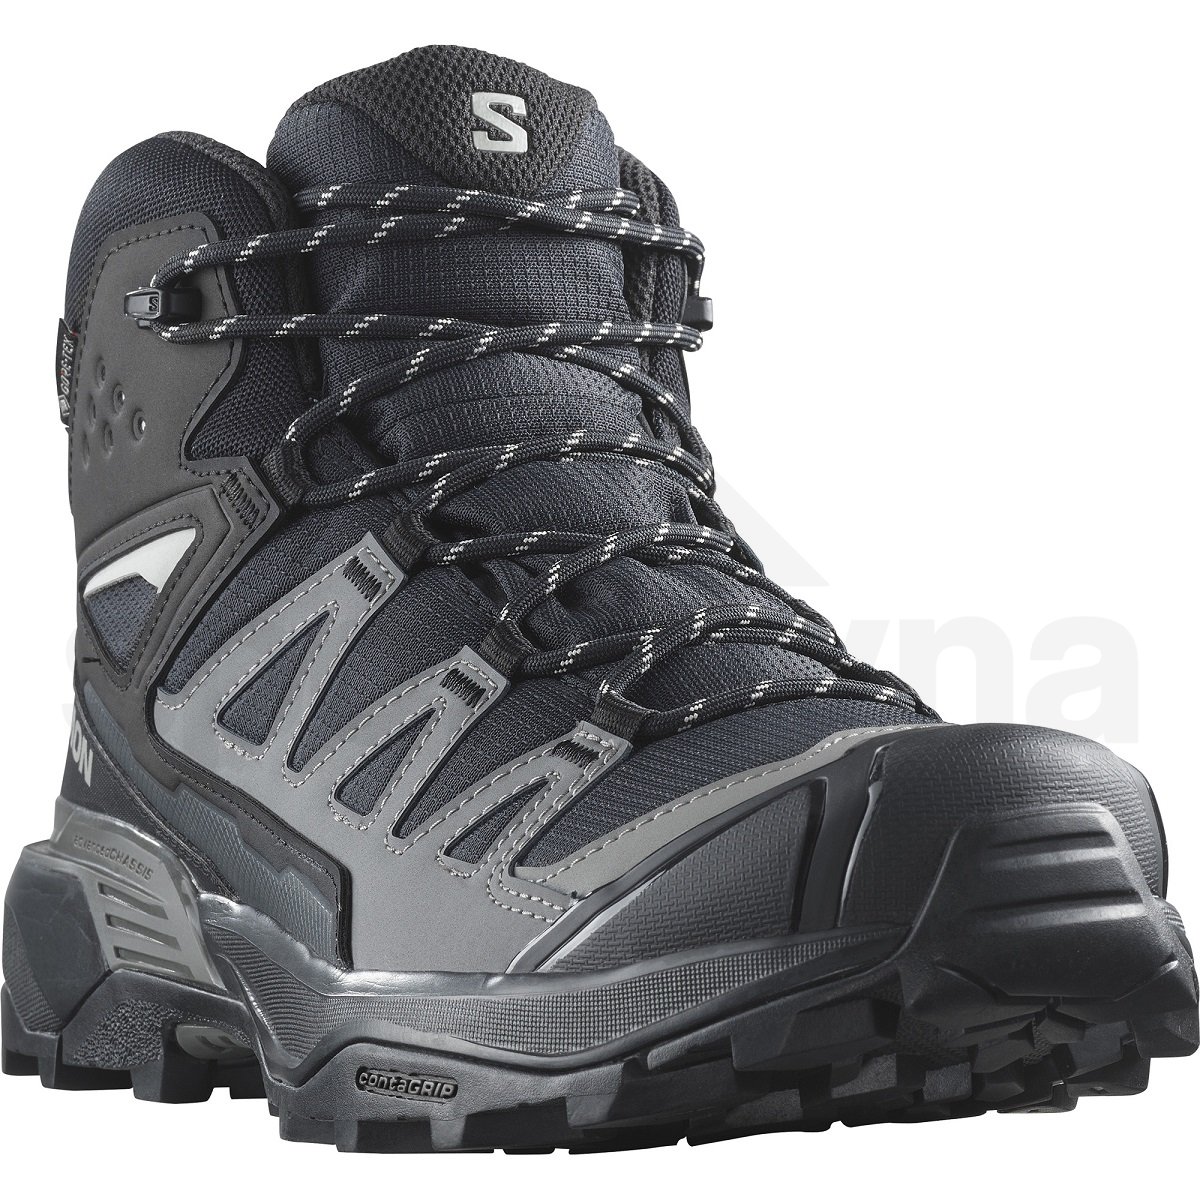 L47447600_5_GHO_X ULTRA 360 MID GTX_Black_Magnet_Pewter.png.high-res